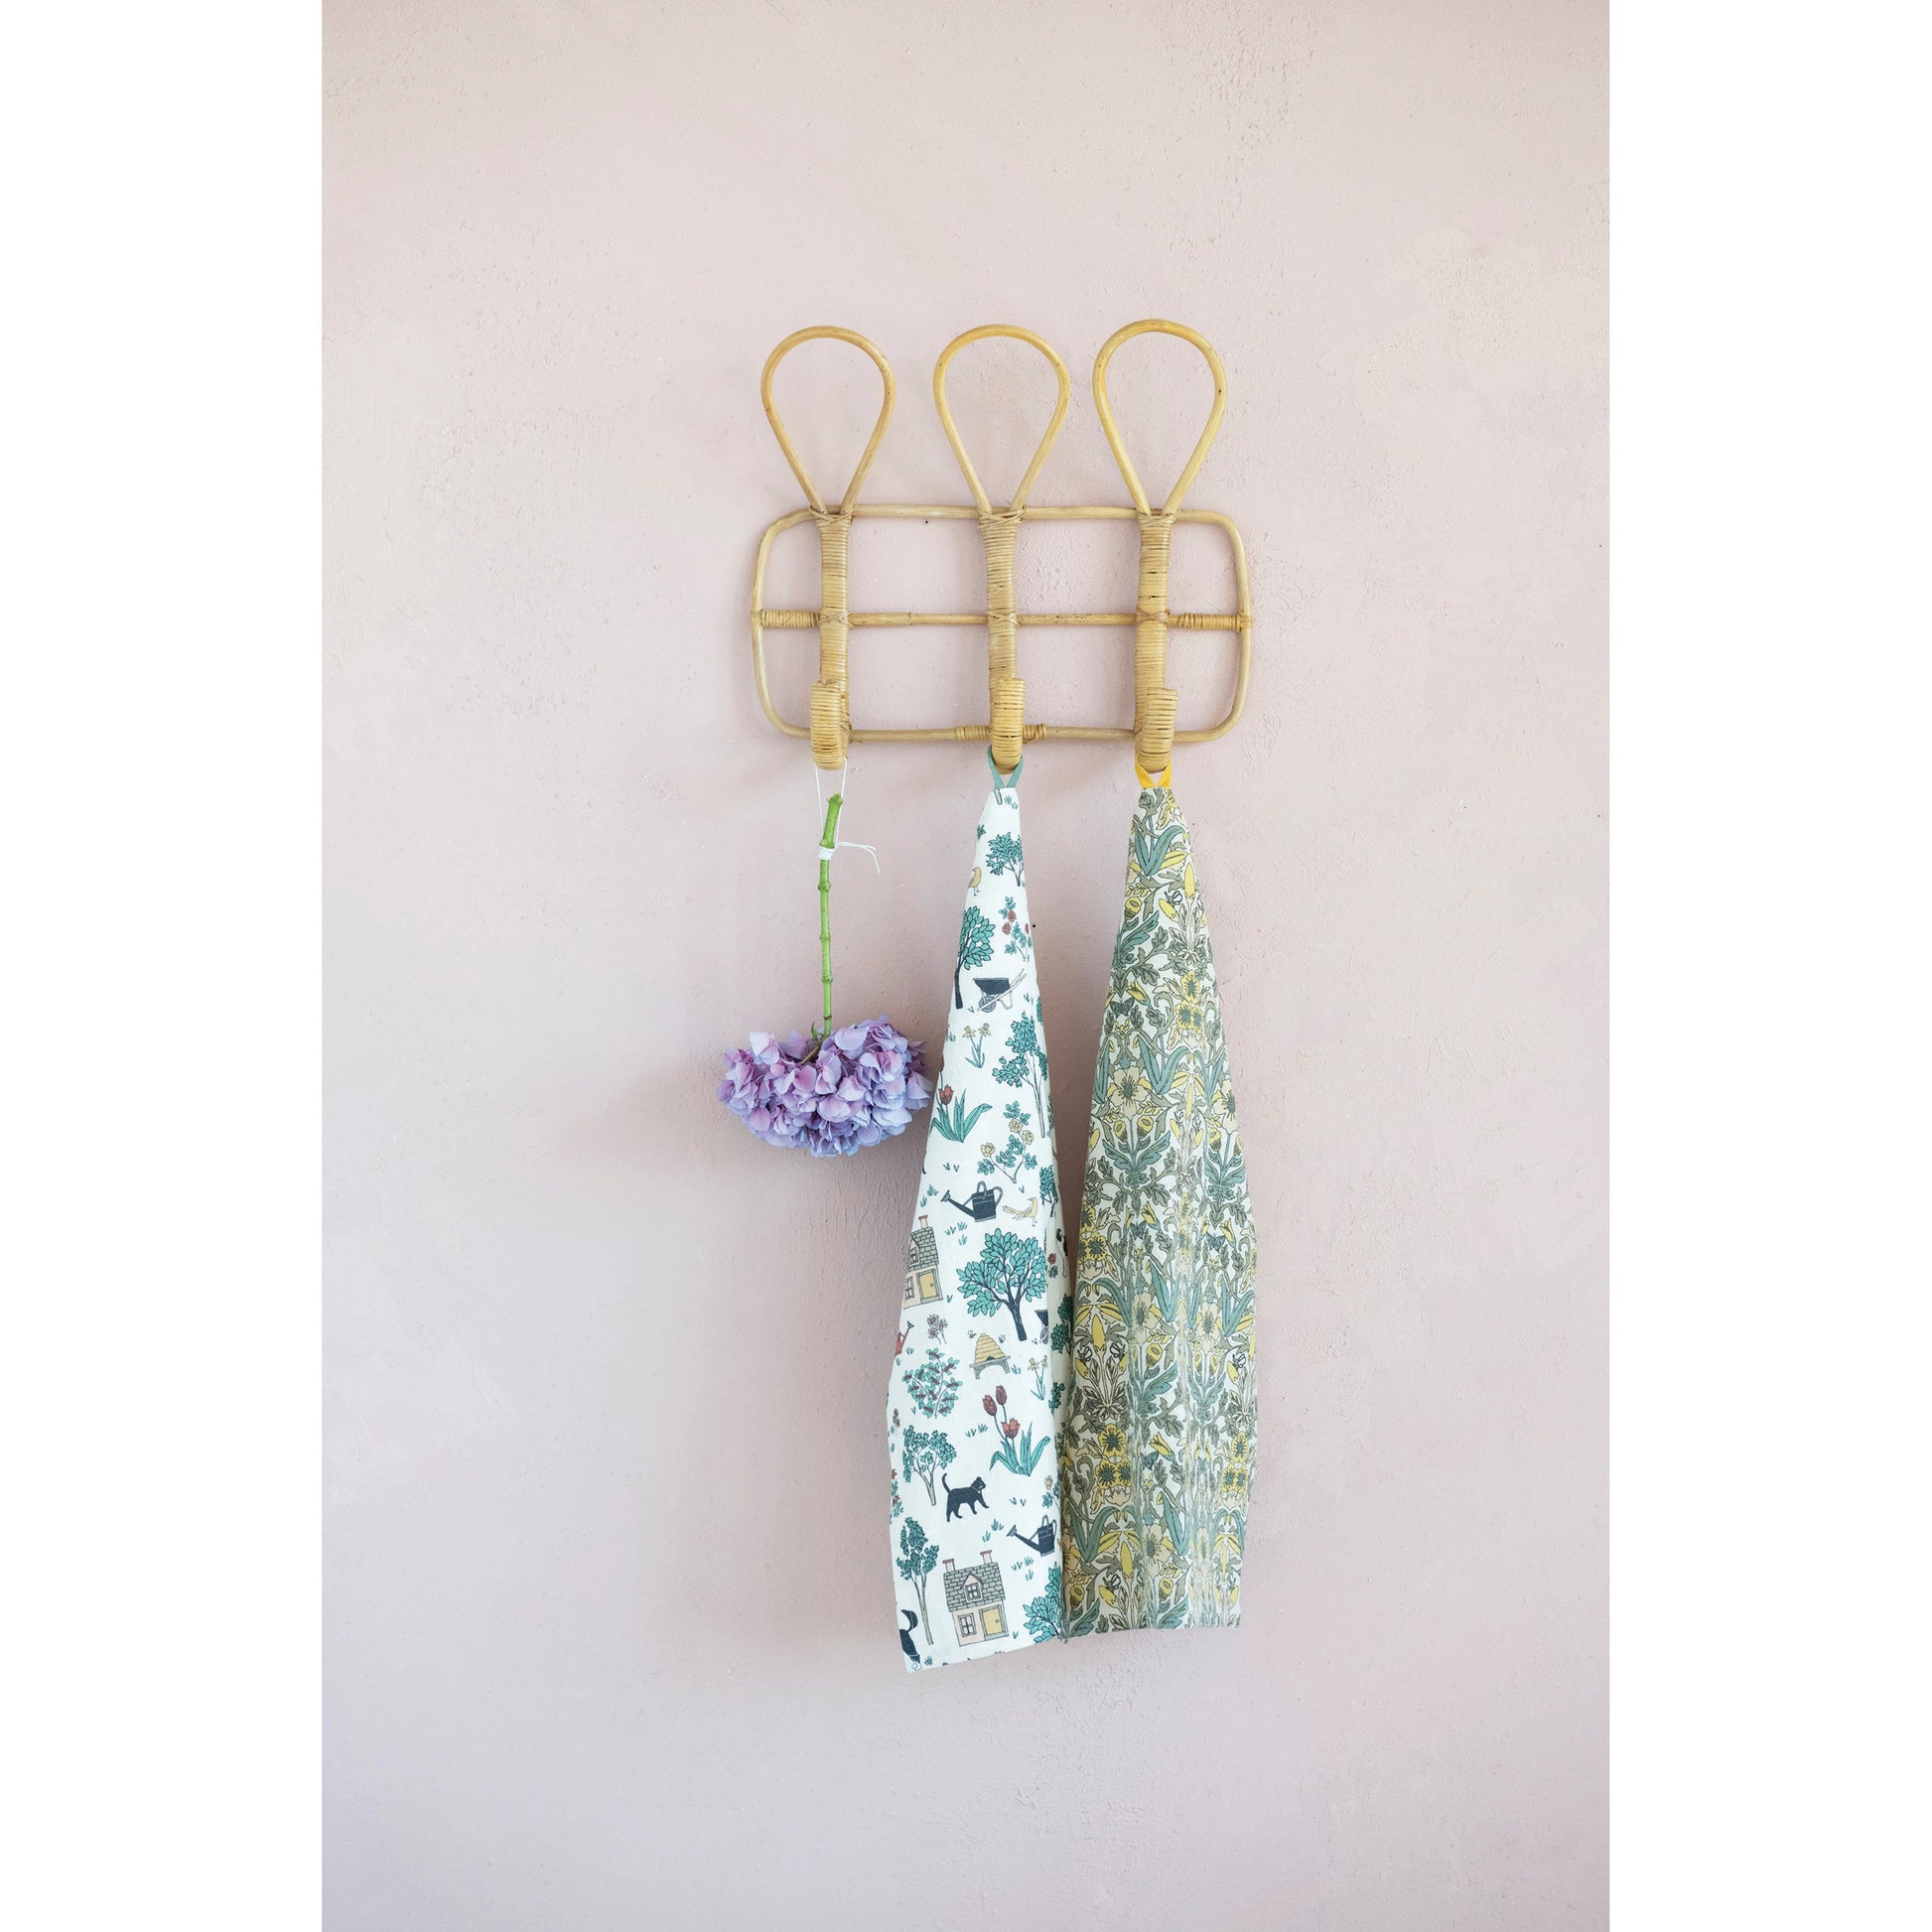 2 dish towels and a floral stem hanging on rattan wall hooks.